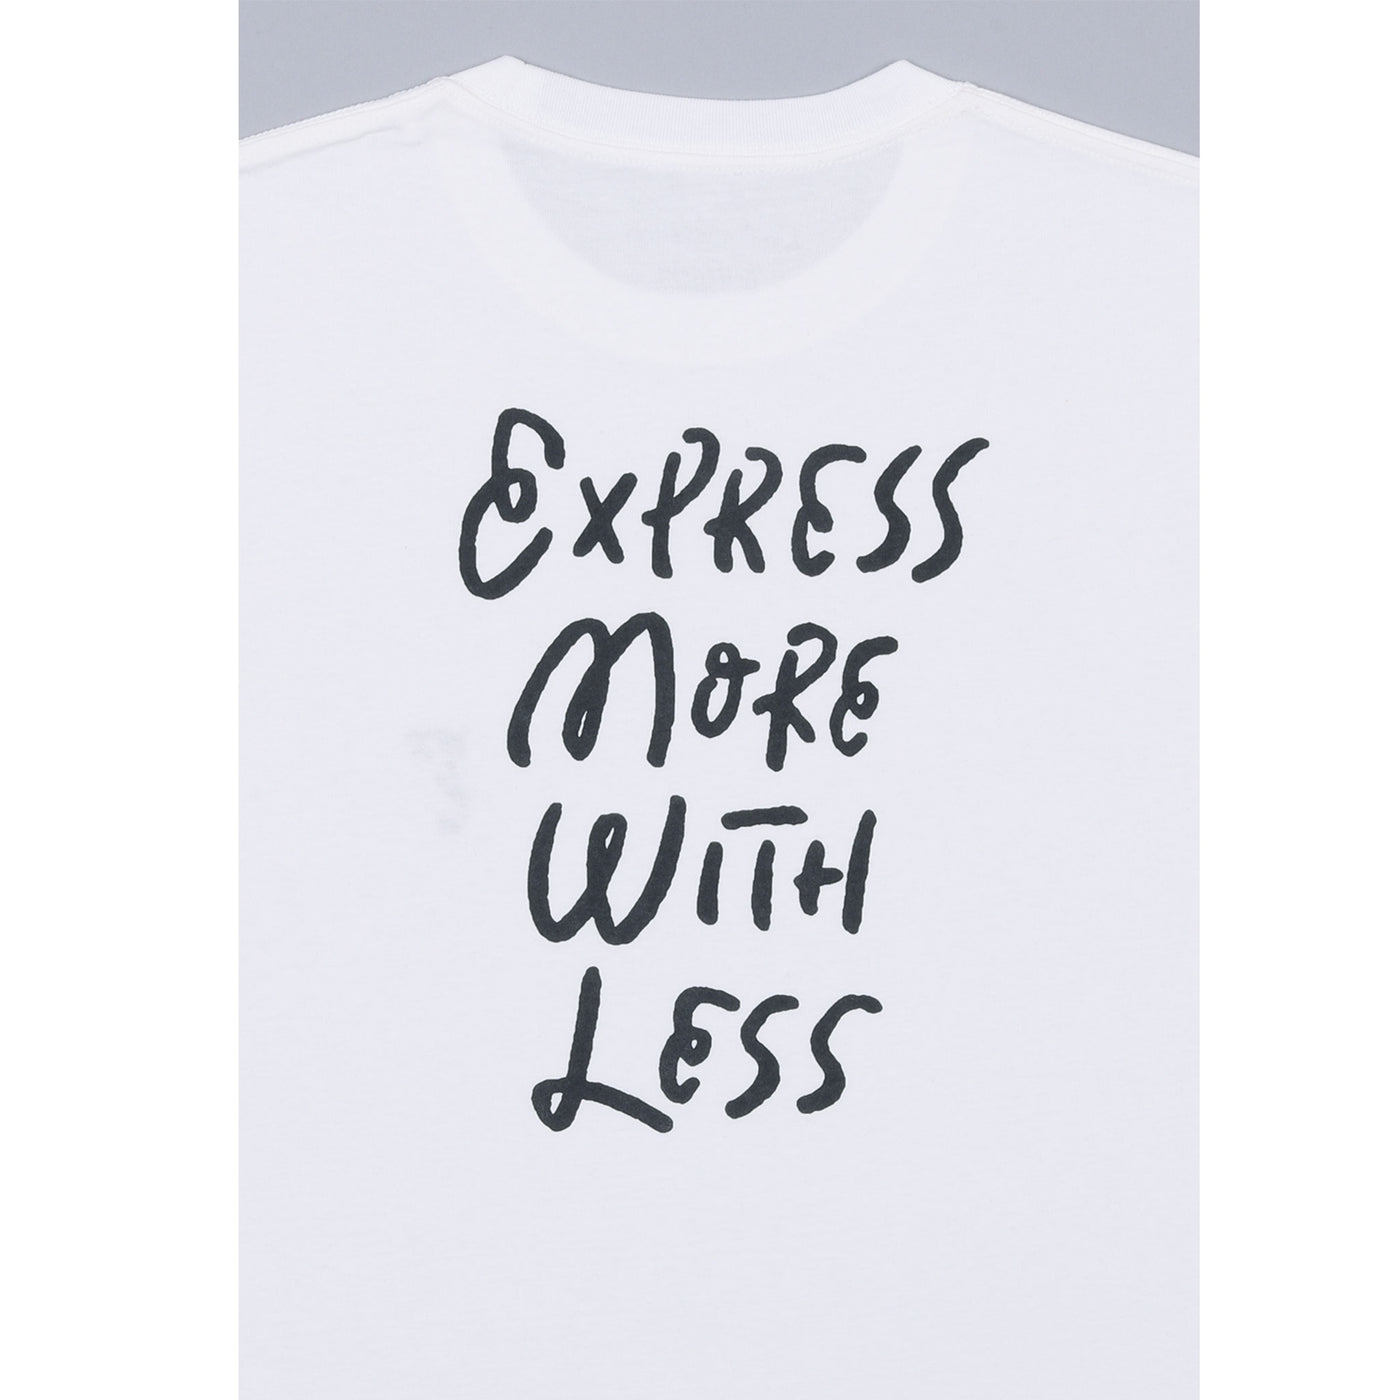 Express More with Less Tシャツ